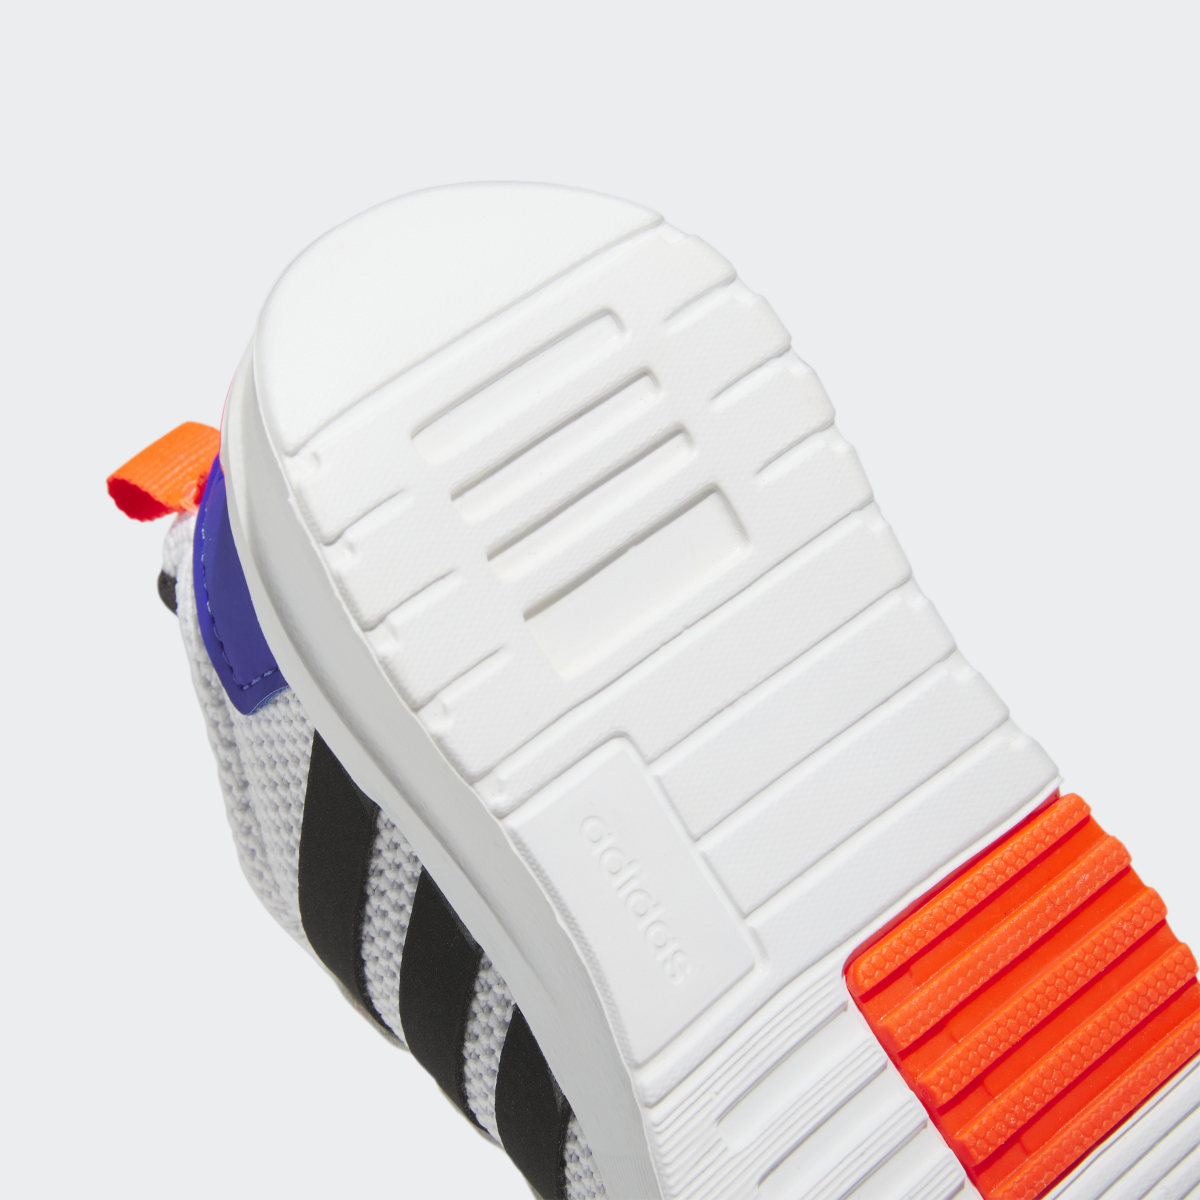 Adidas Racer TR21 Shoes. 10